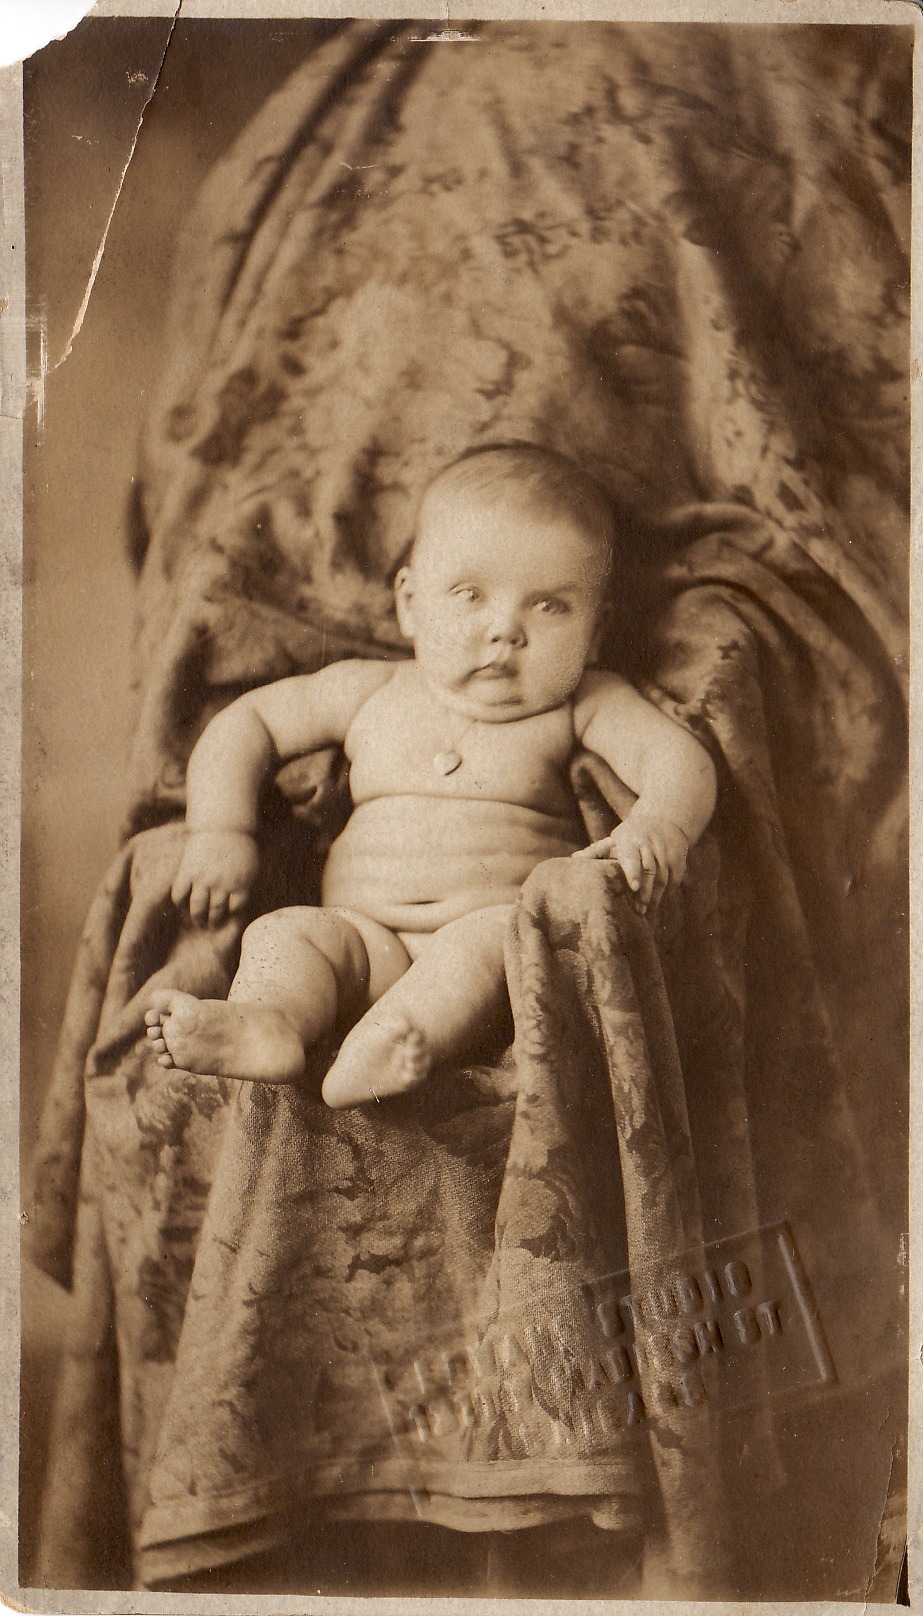 I was perusing my grandparents’ belongings and found this photo of my (awesome) grandmother when she was three months old in 1924. I was super-excited when I found it because I think it’s a hidden-mother portrait.
For those who don’t know,...